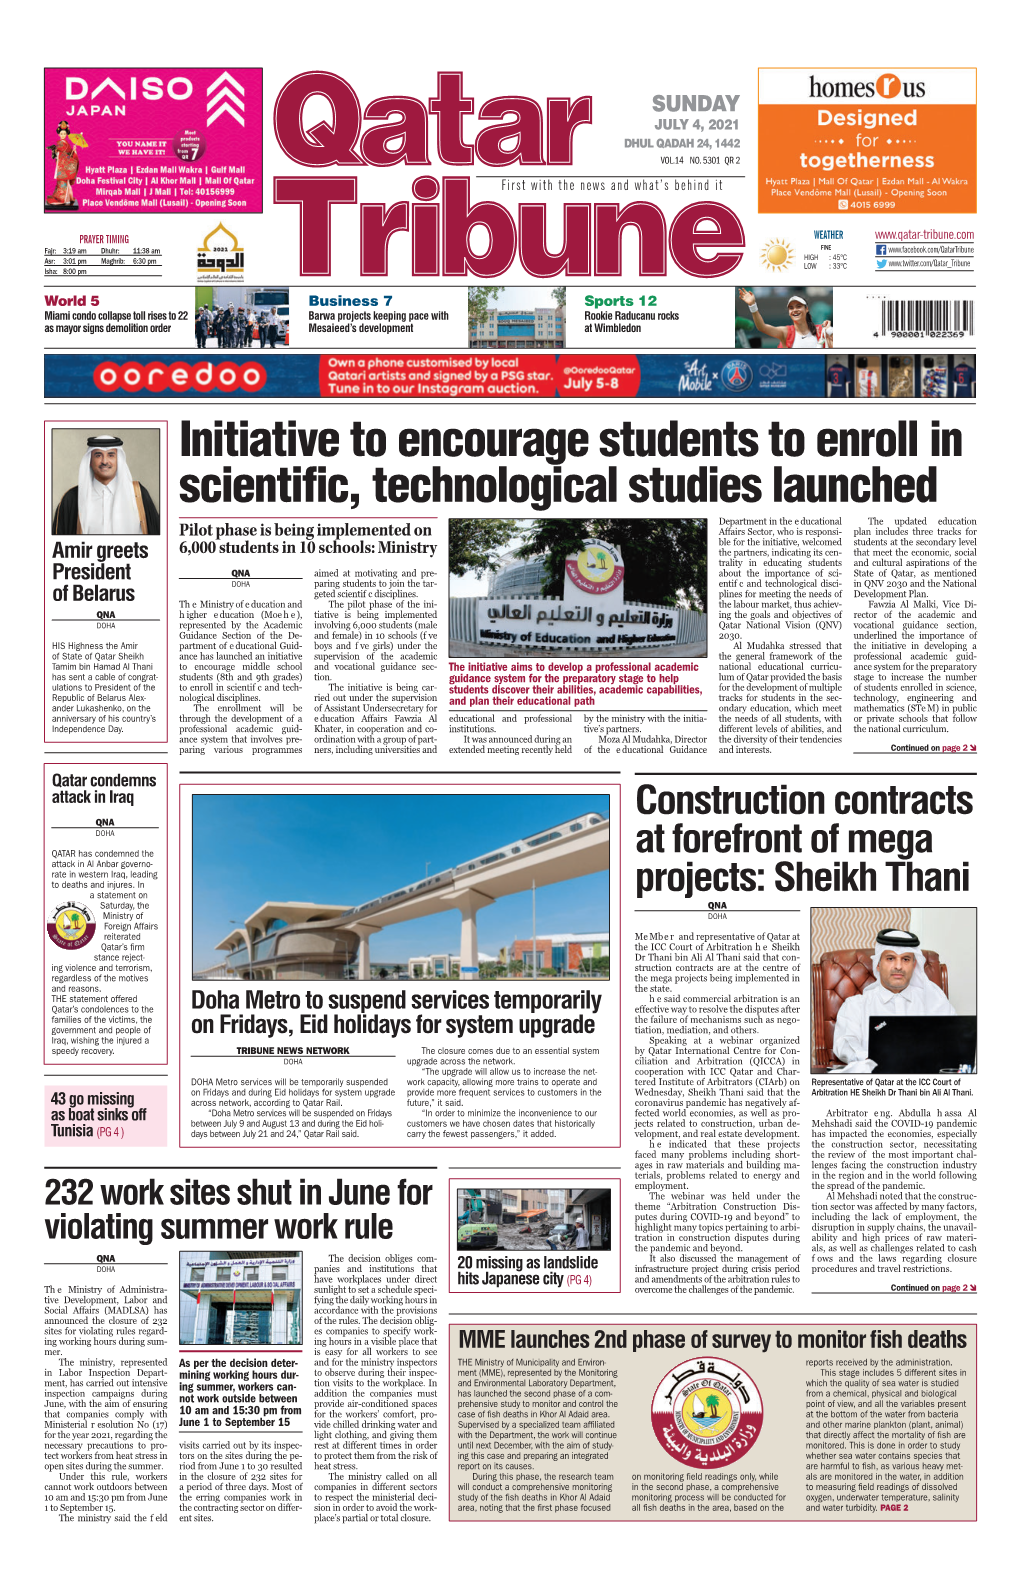 Initiative to Encourage Students to Enroll in Scientific, Technological